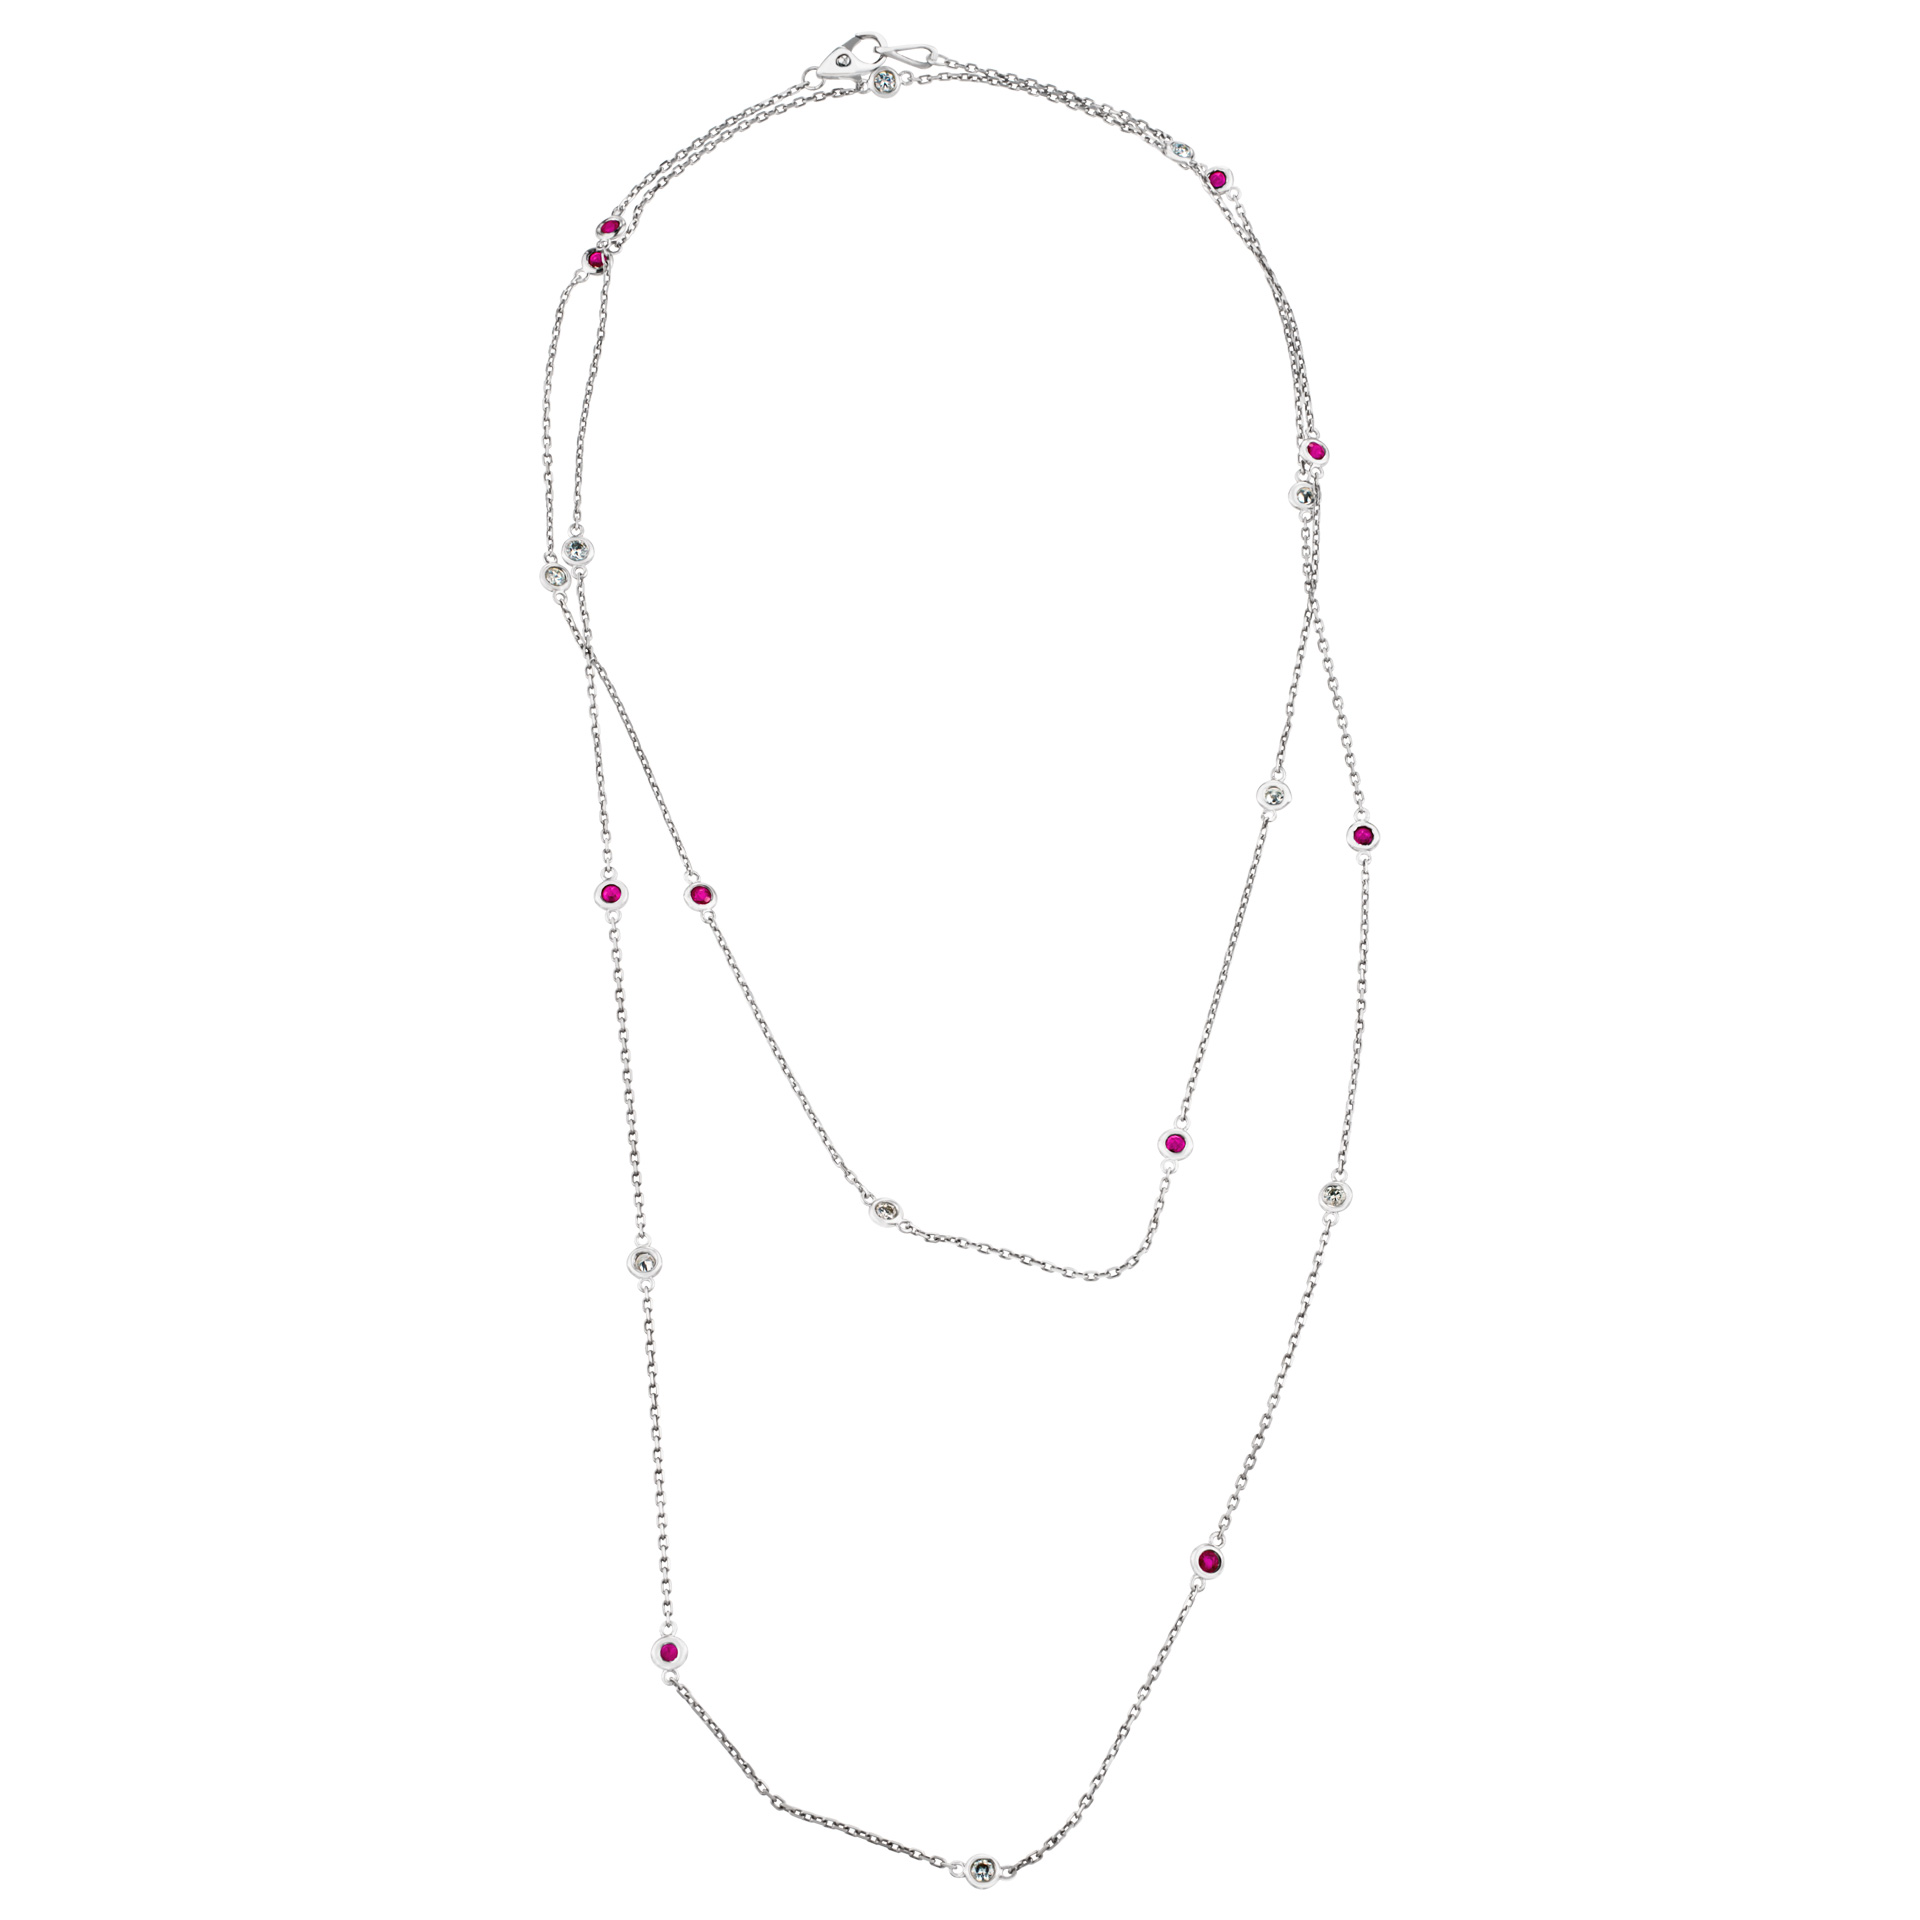 Diamonds and rubies by the yard necklace in14K white gold